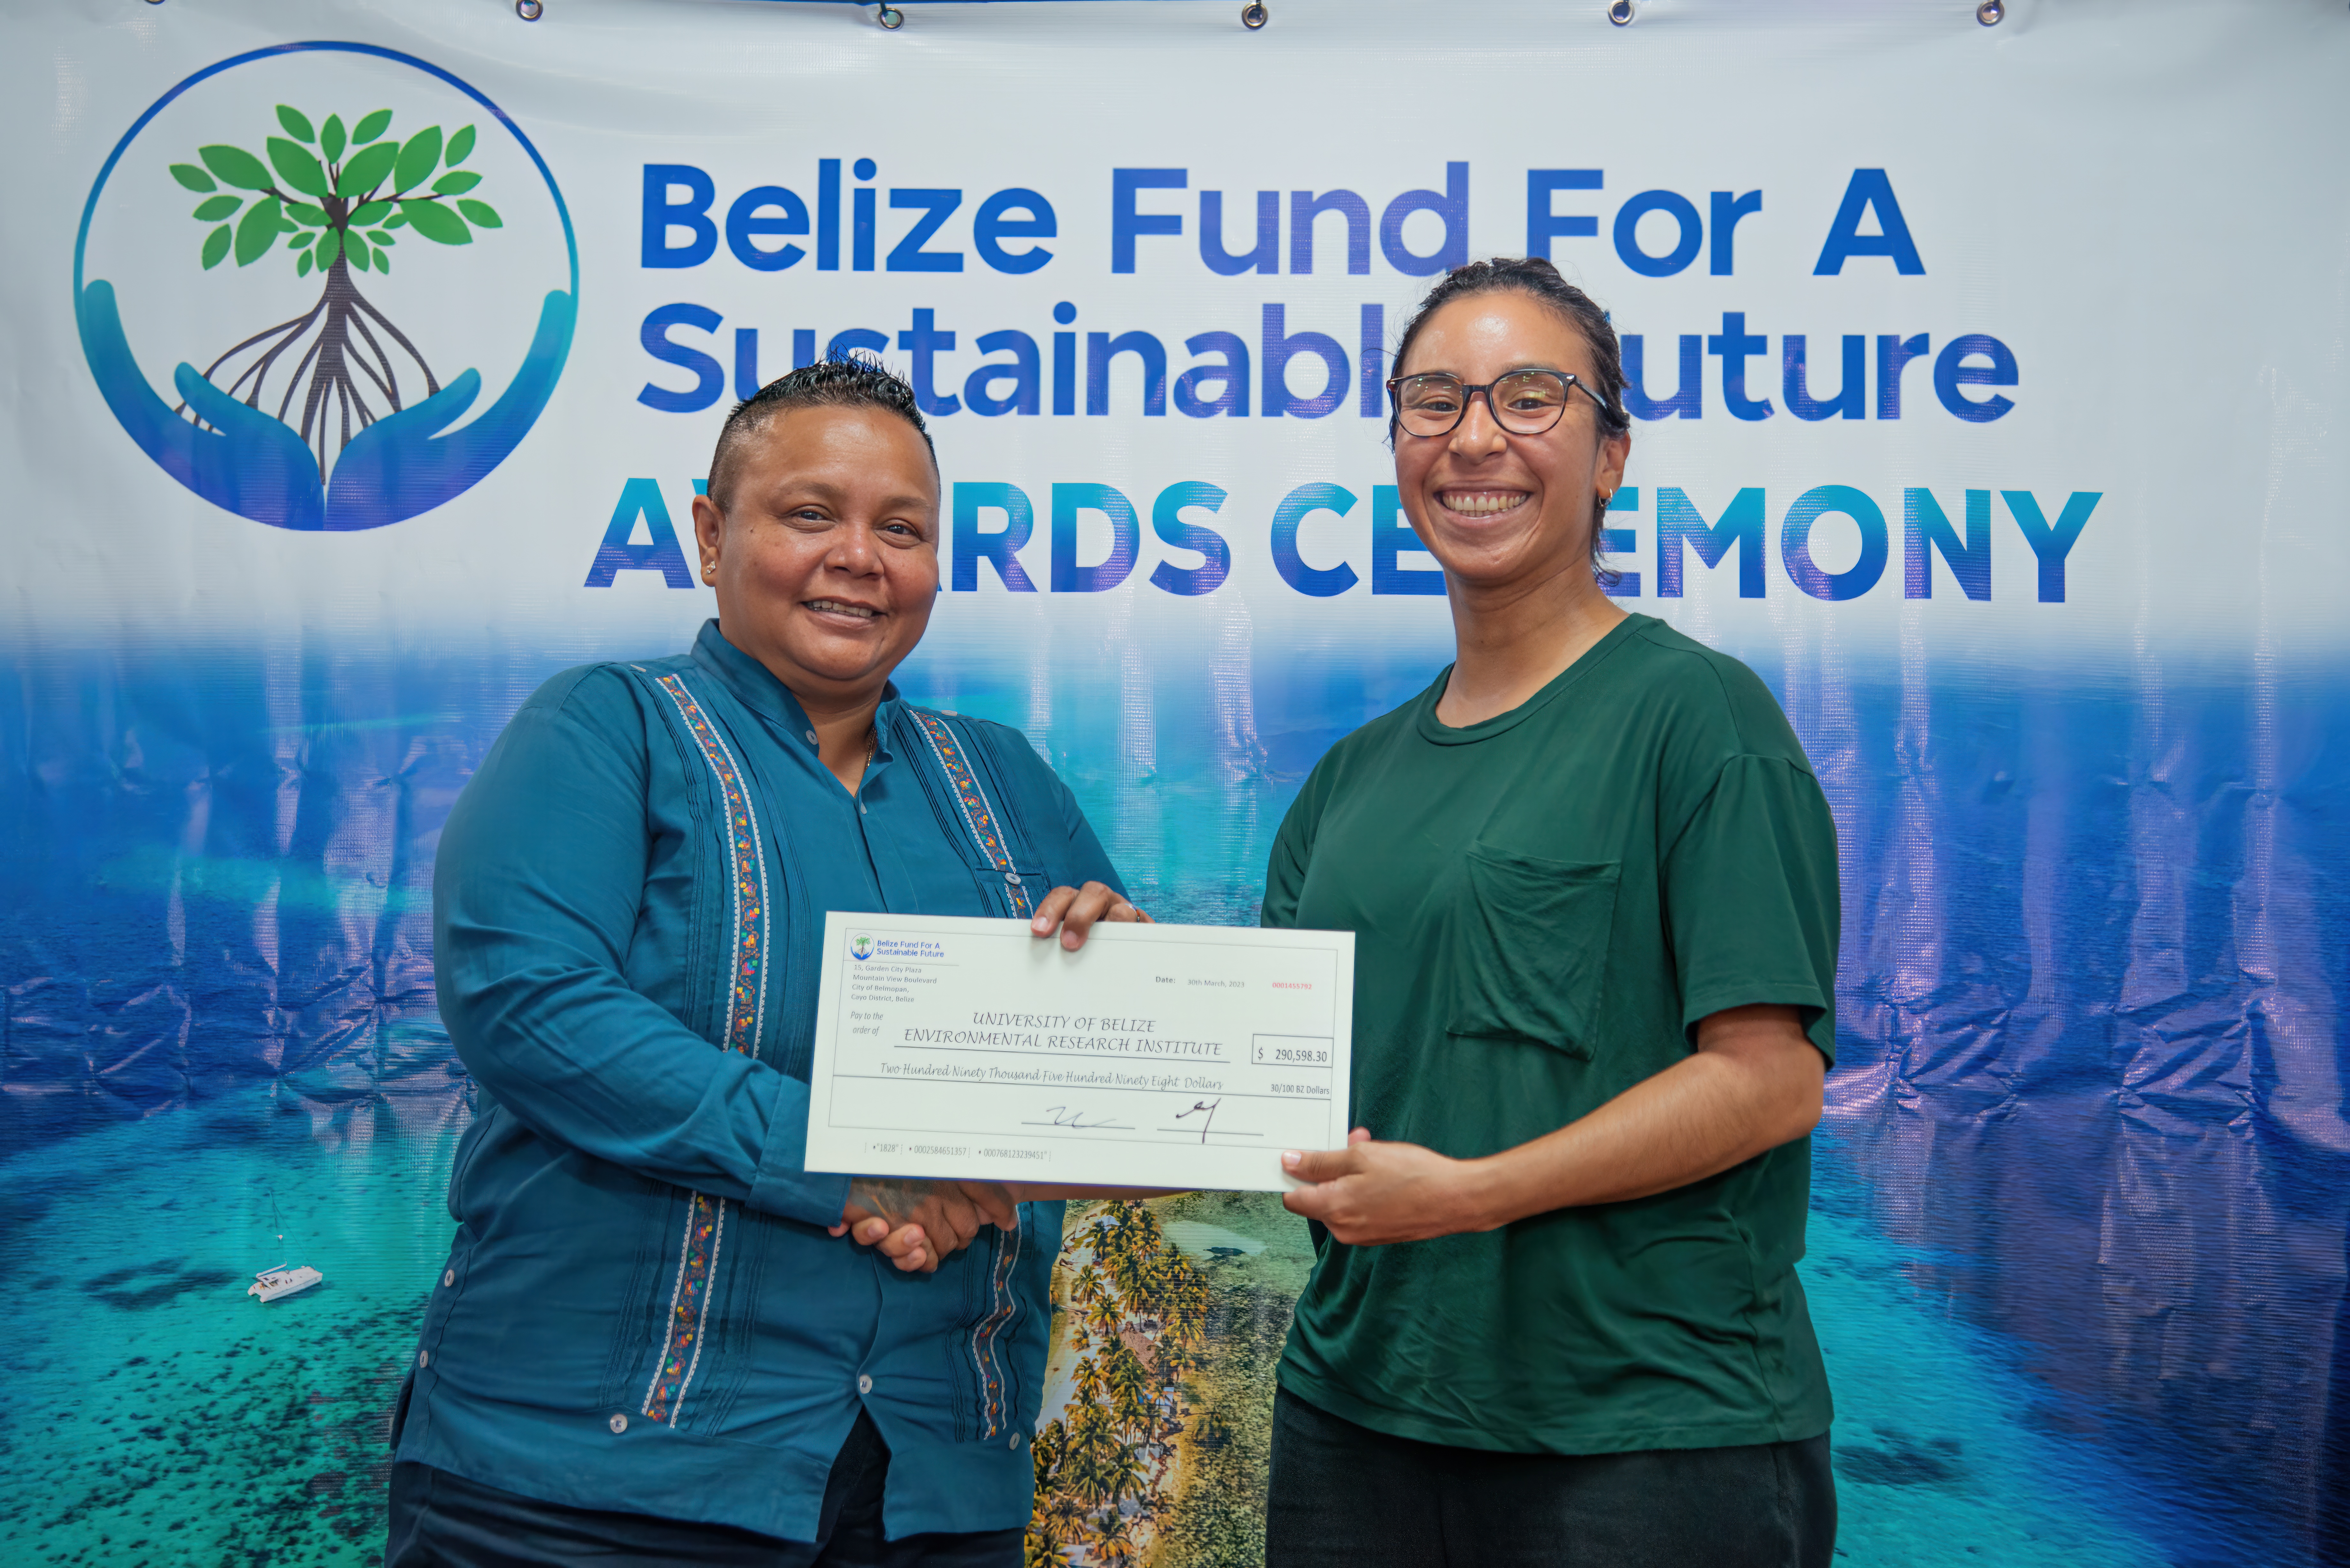 Belize Fund Holds First Awards Ceremony for GSA and GAP Projects